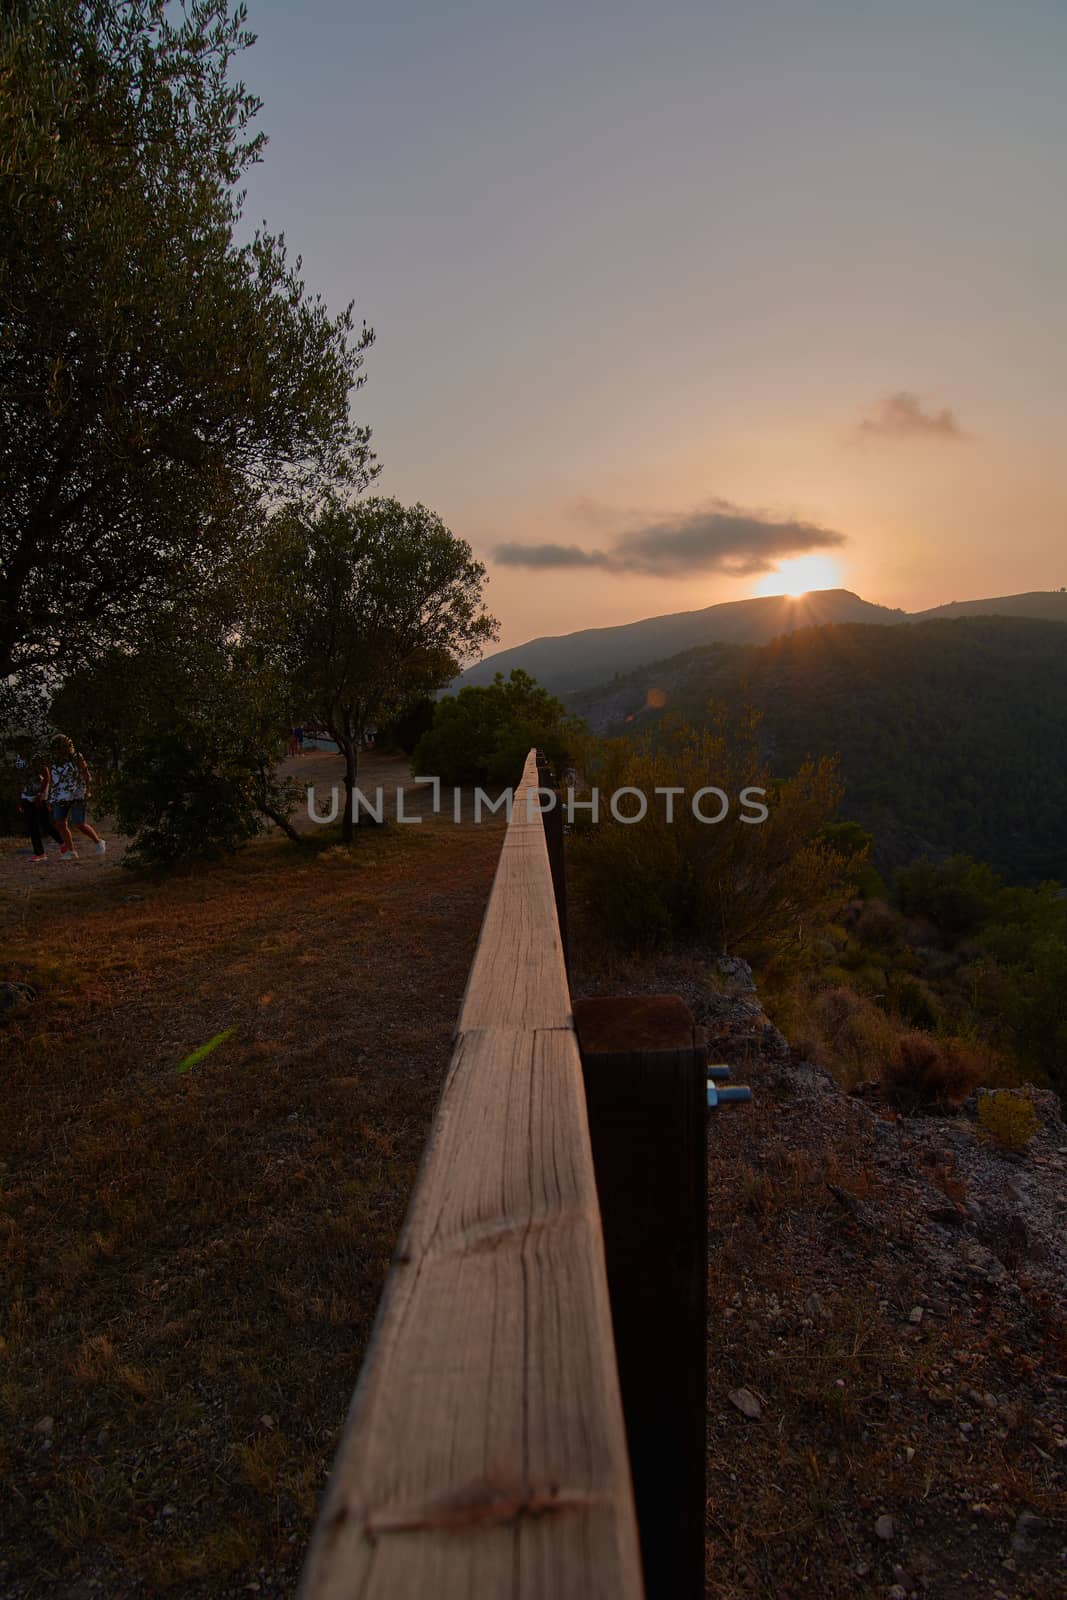 Wooden path to the sun in the mountain